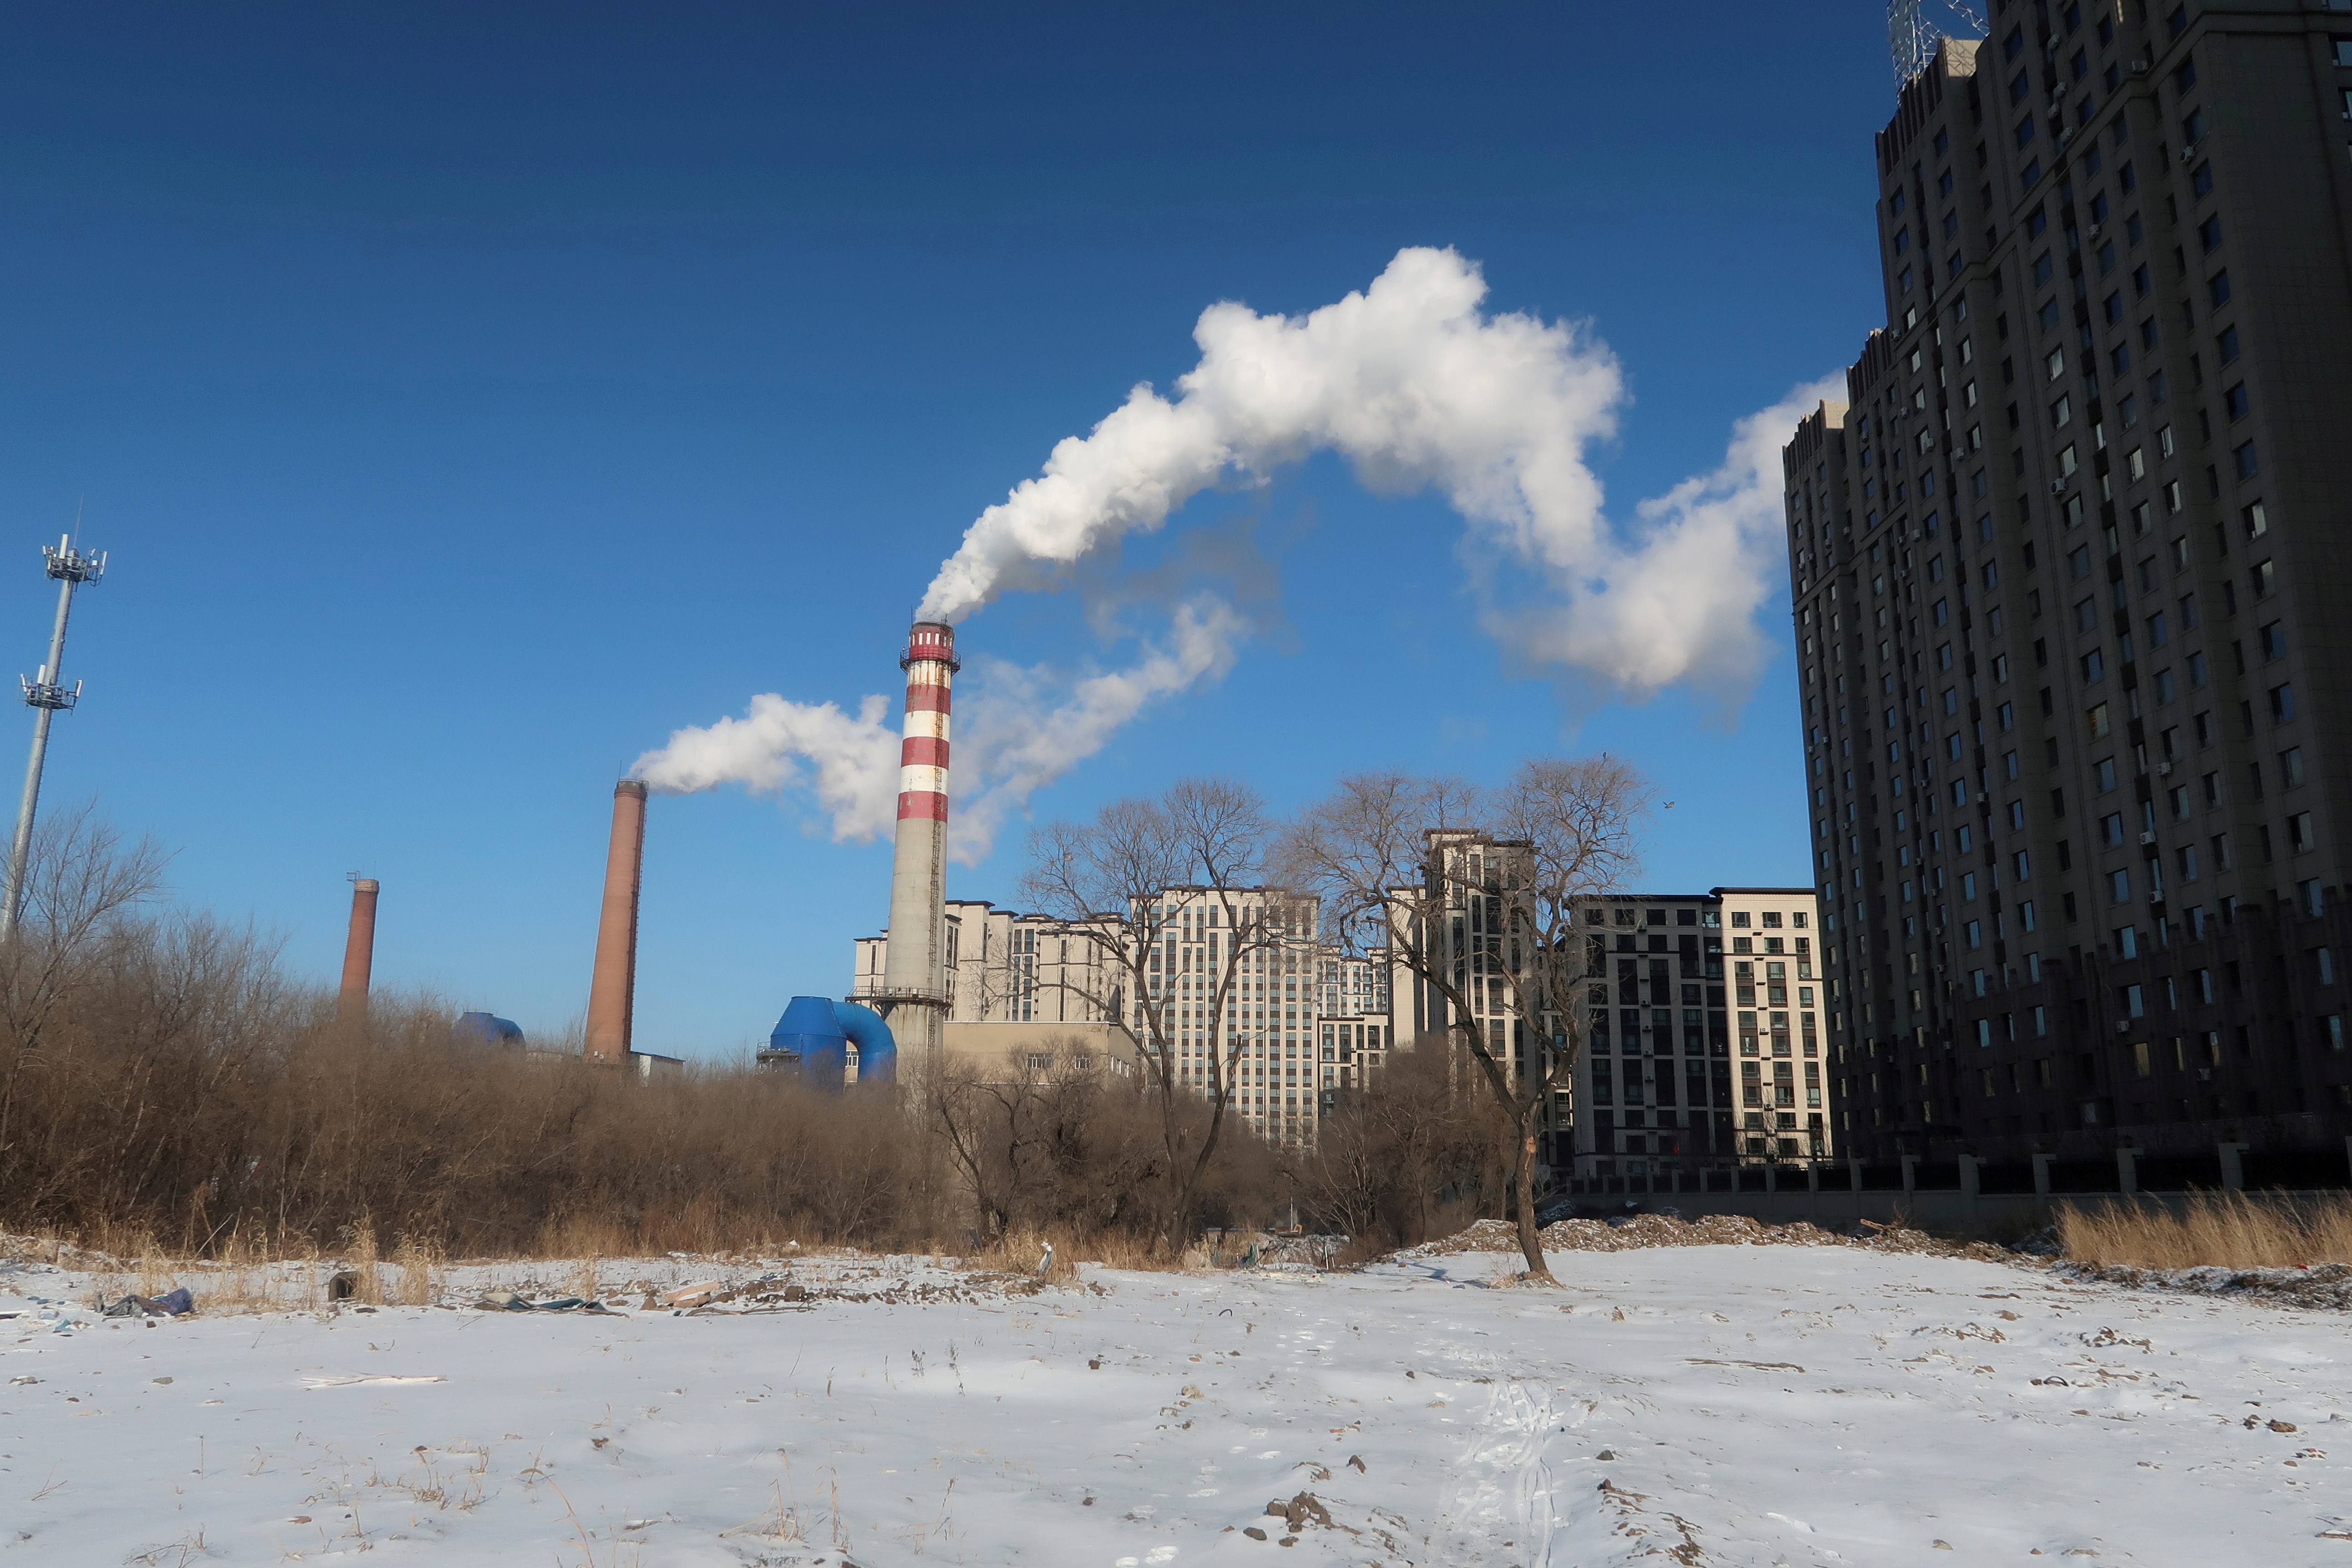 A coal-fired heating complex is seen behind the ground covered by snow in Harbin